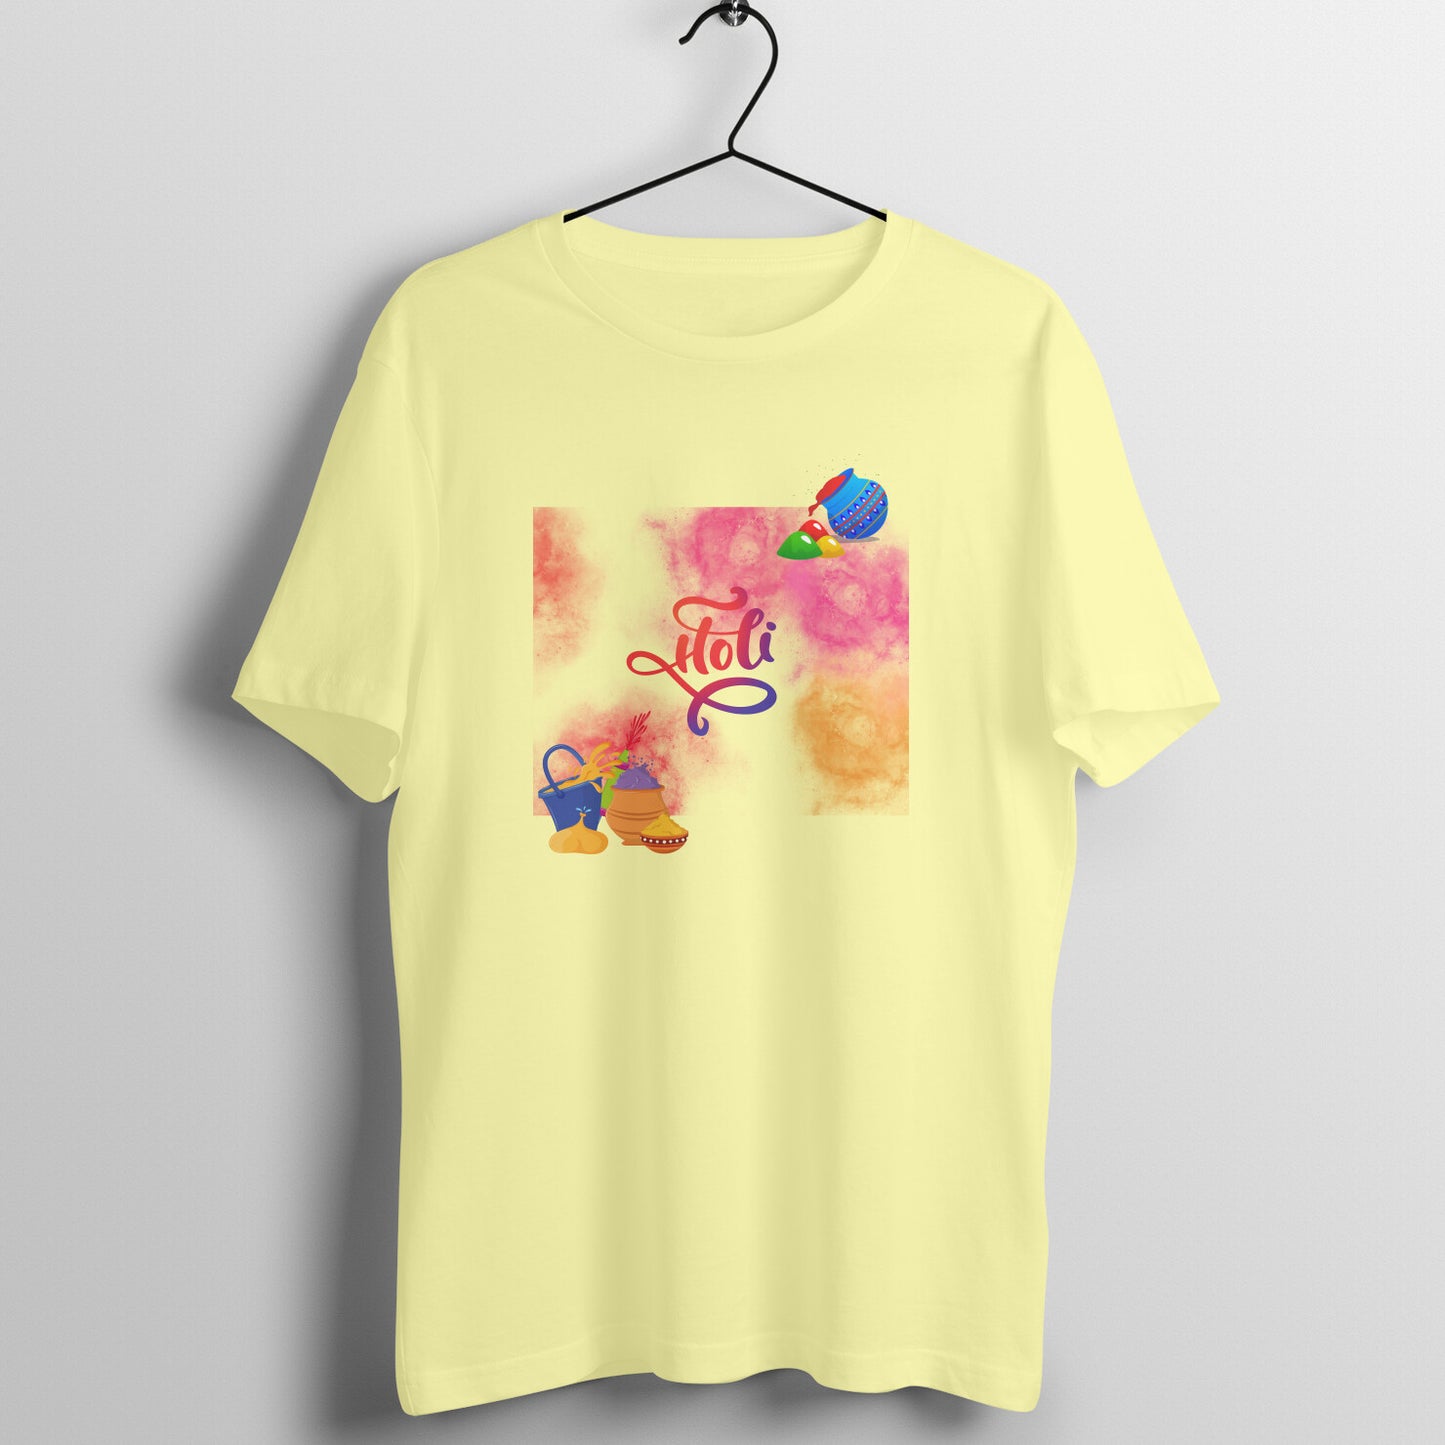 Enjoy Holi in Style: Men's Round Neck T-Shirt with Indian Festival Colors Design